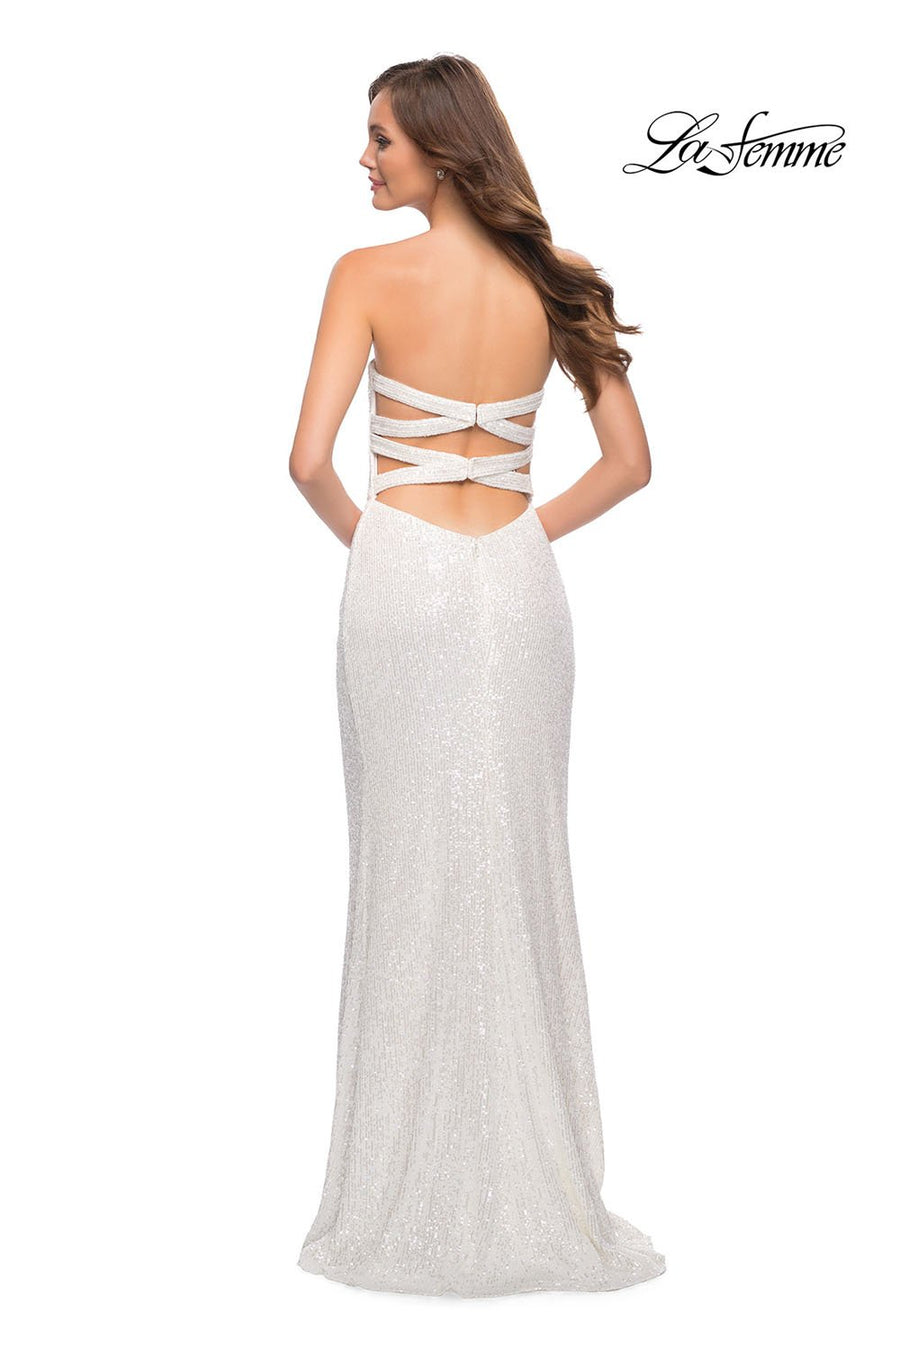 La Femme 29681 prom dress images.  La Femme 29681 is available in these colors: Red, White.